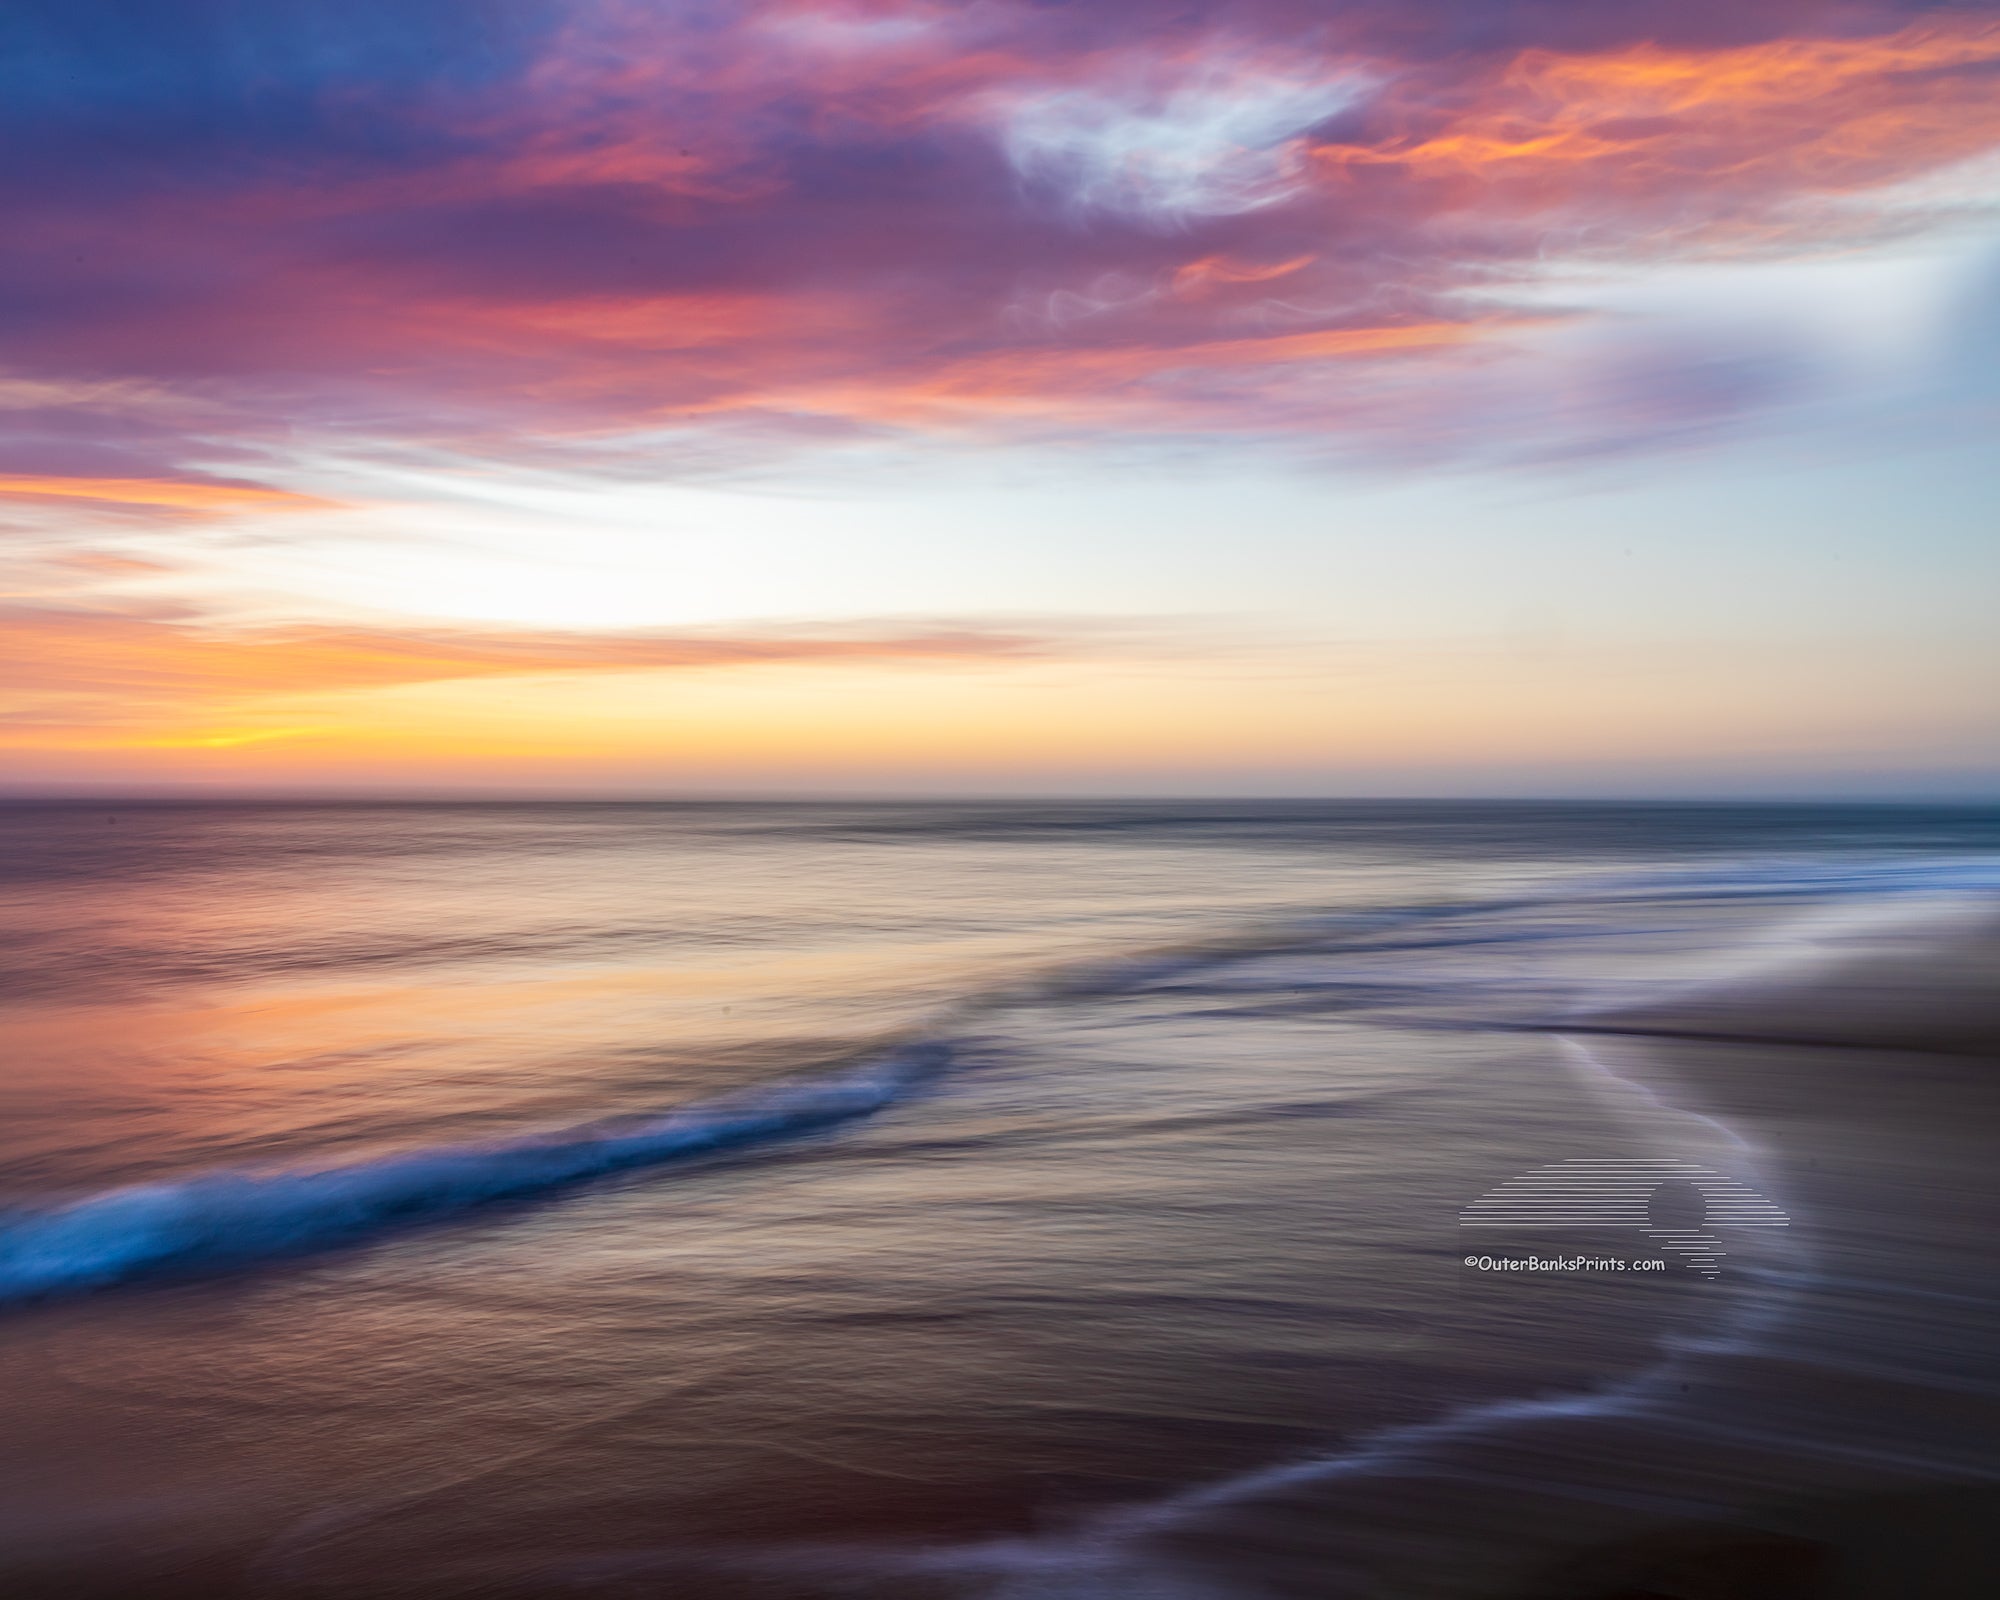 This impressionistic photo was taken at sunrise on Coquina Beach, Outer Banks NC.